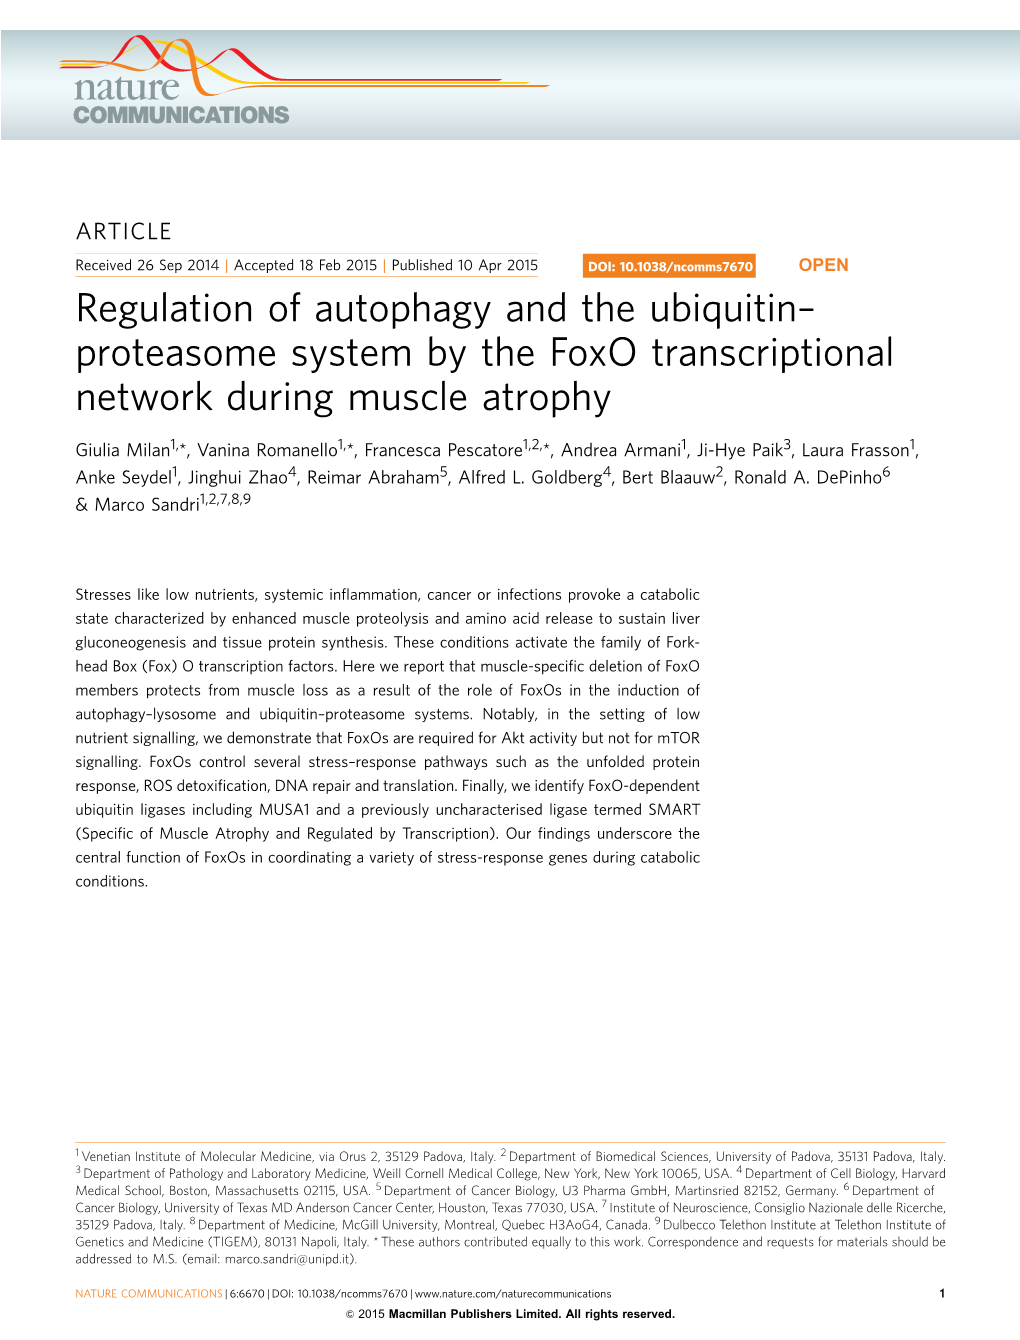 Proteasome System by the Foxo Transcriptional Network During Muscle Atrophy